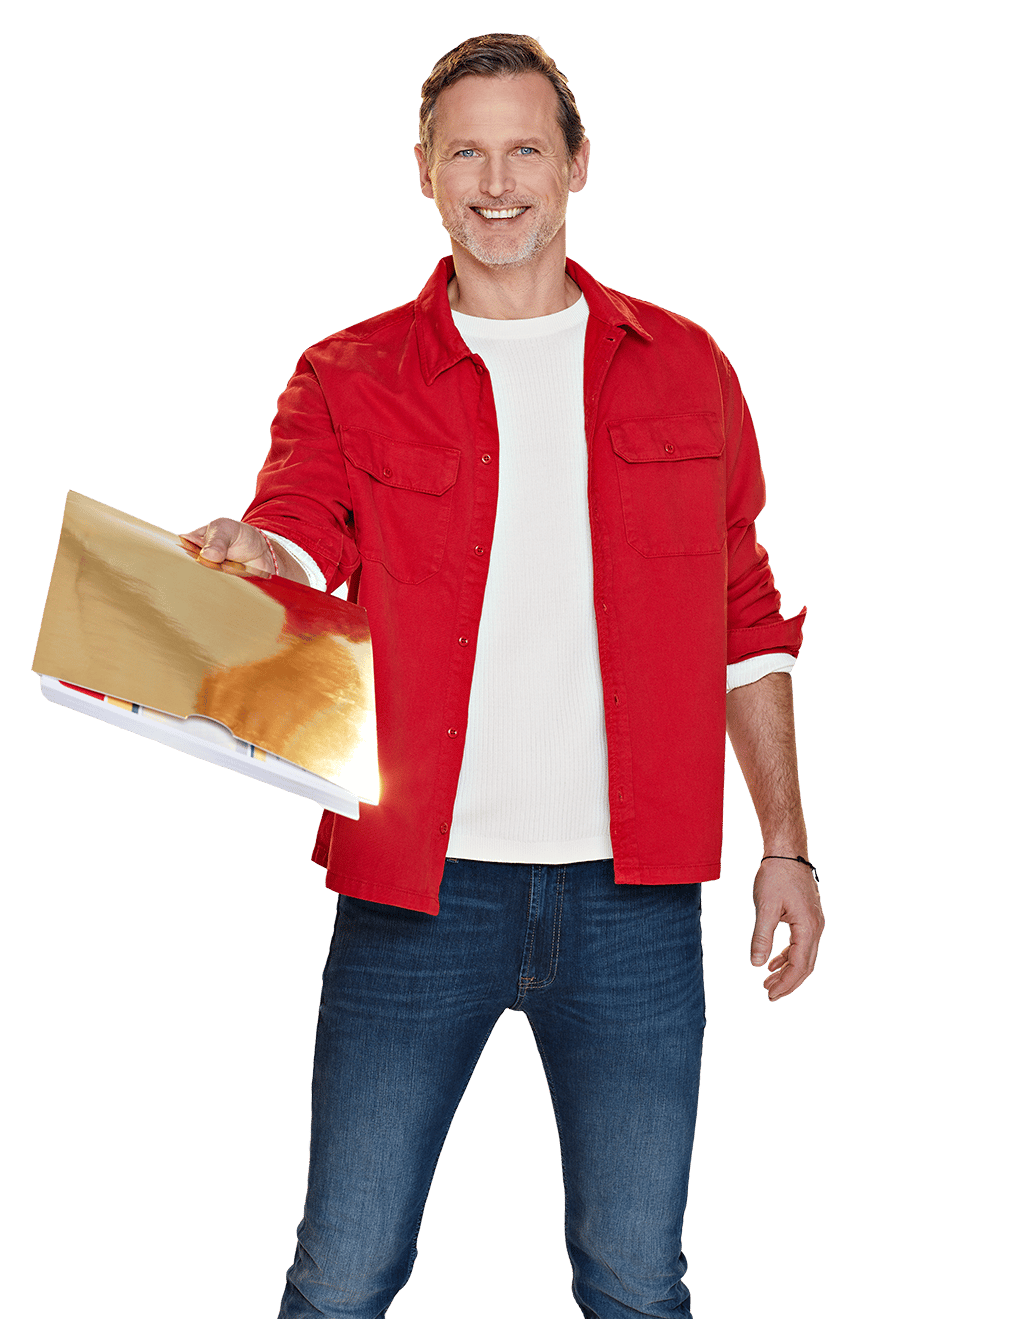 Clothing, Smile, Jeans, Sleeve, Gesture, Collar